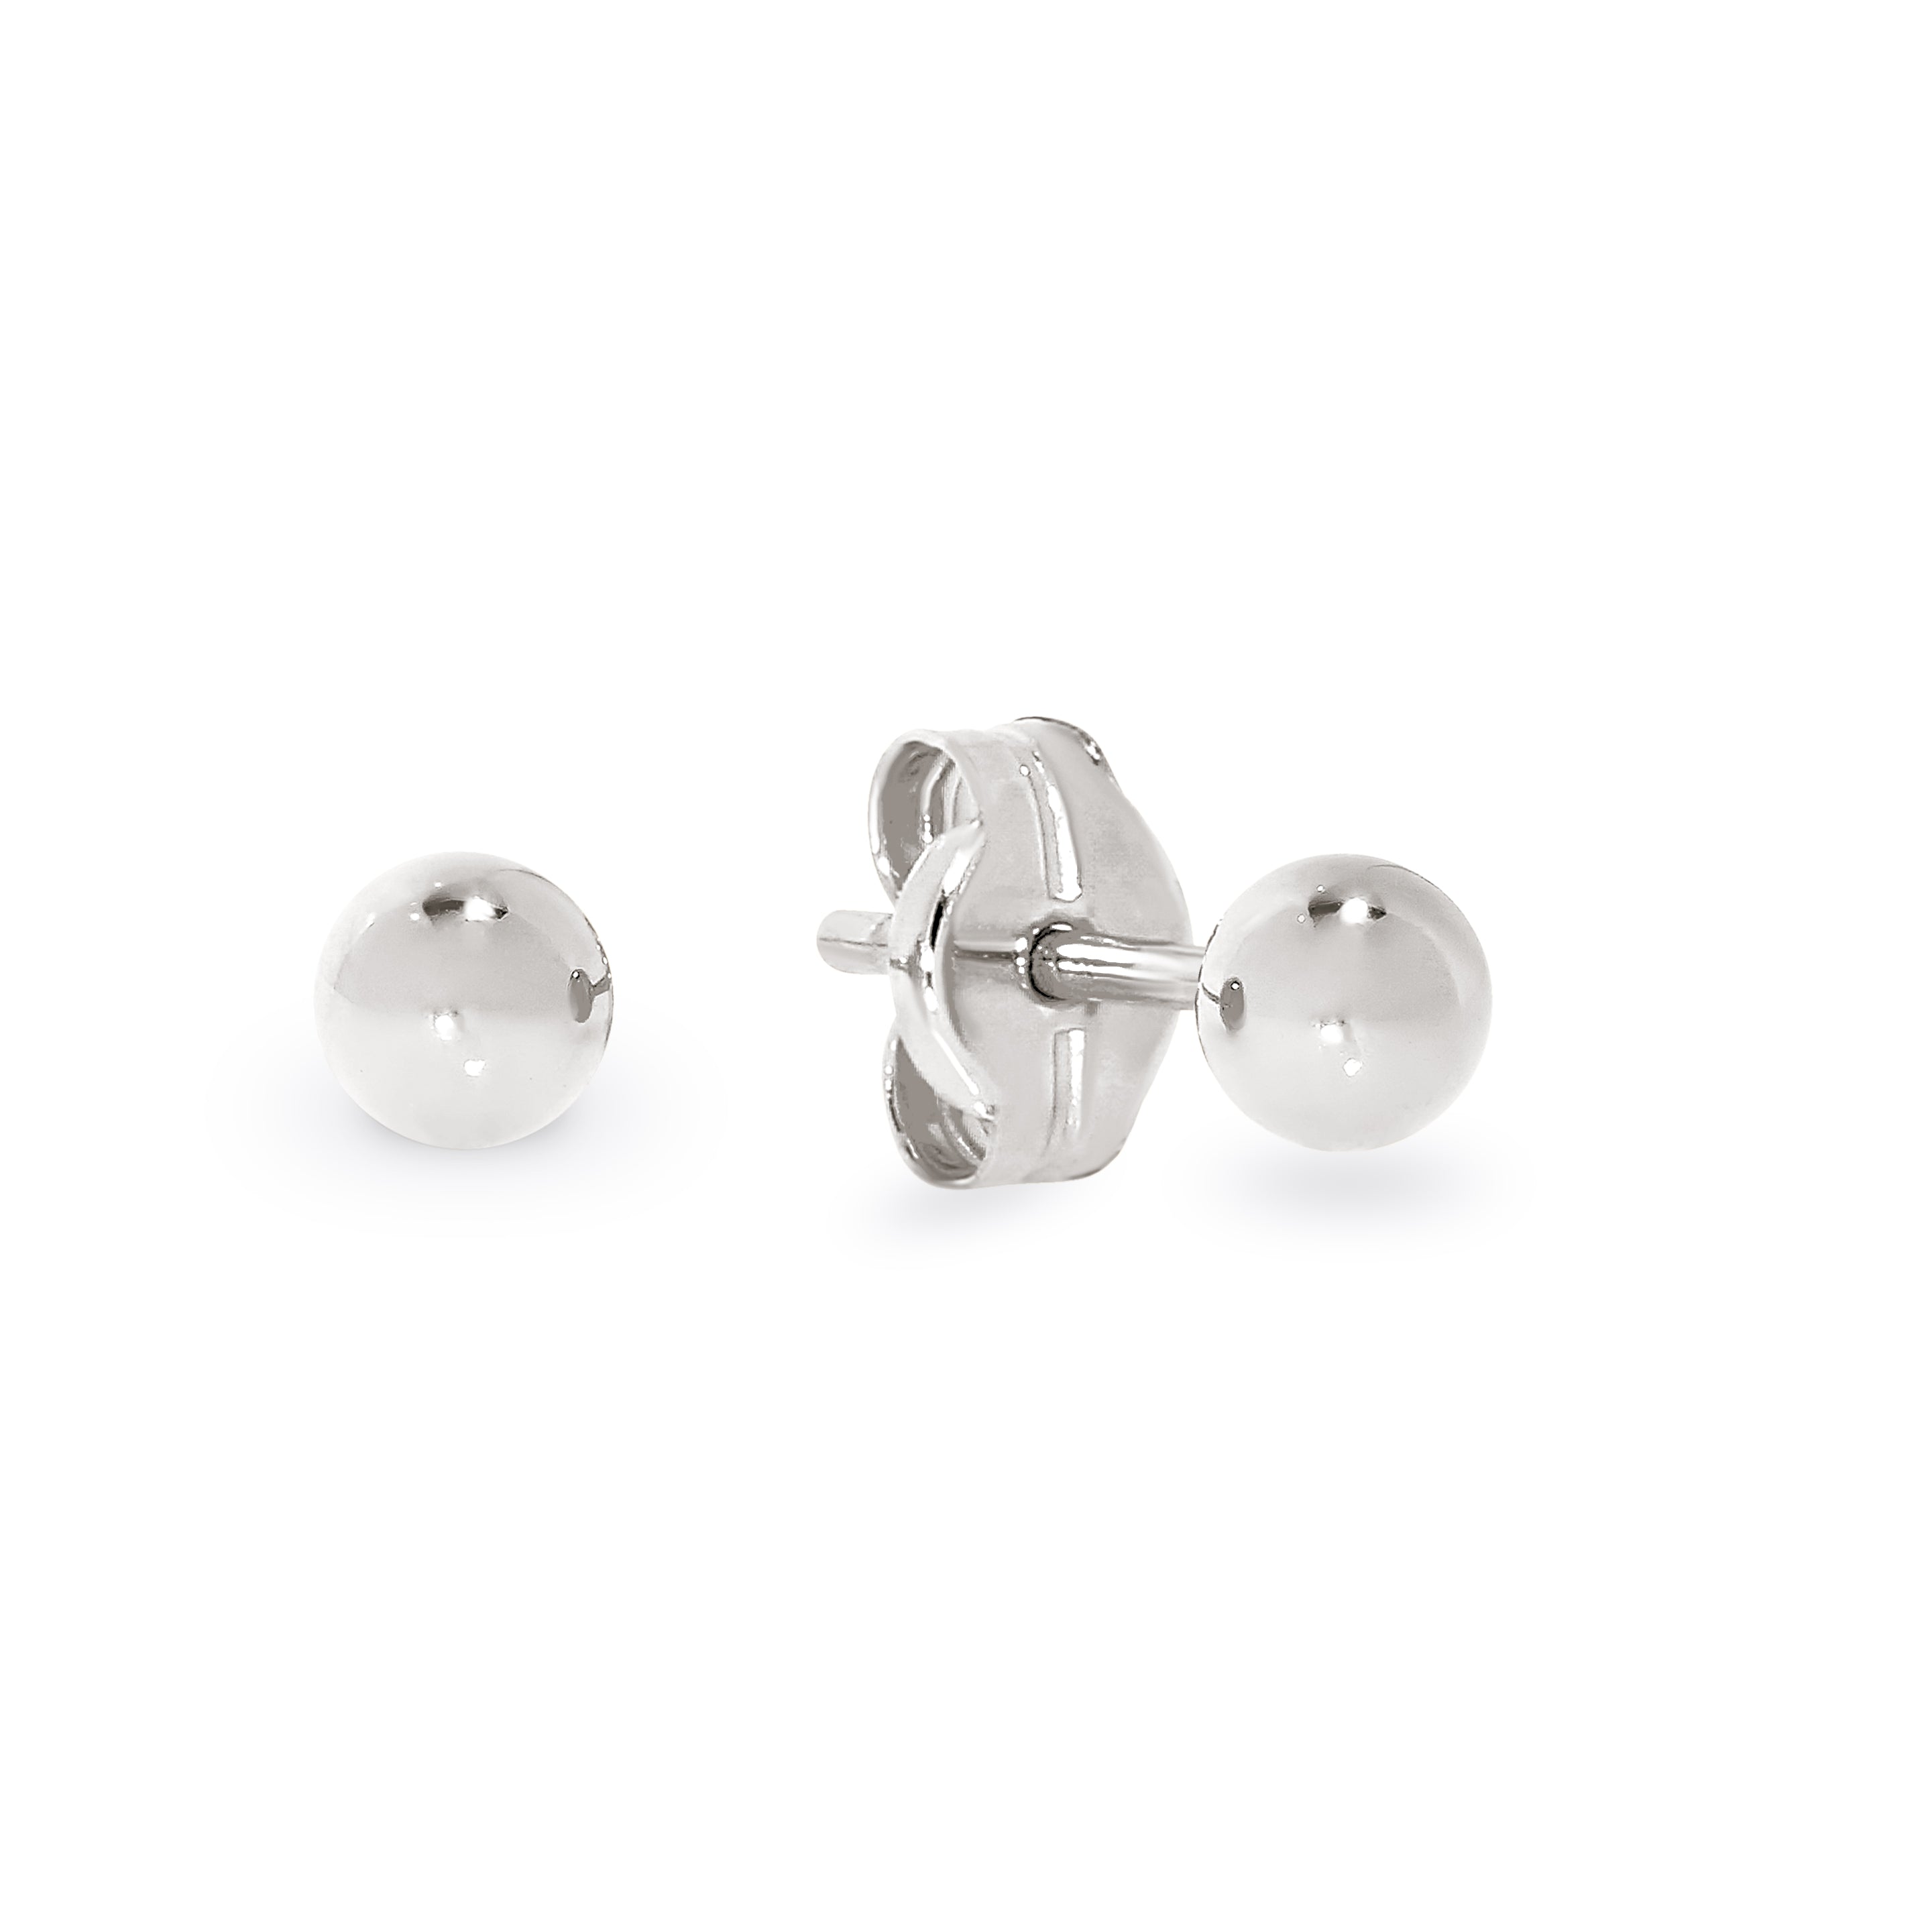 Silver polished 3mm ball studs